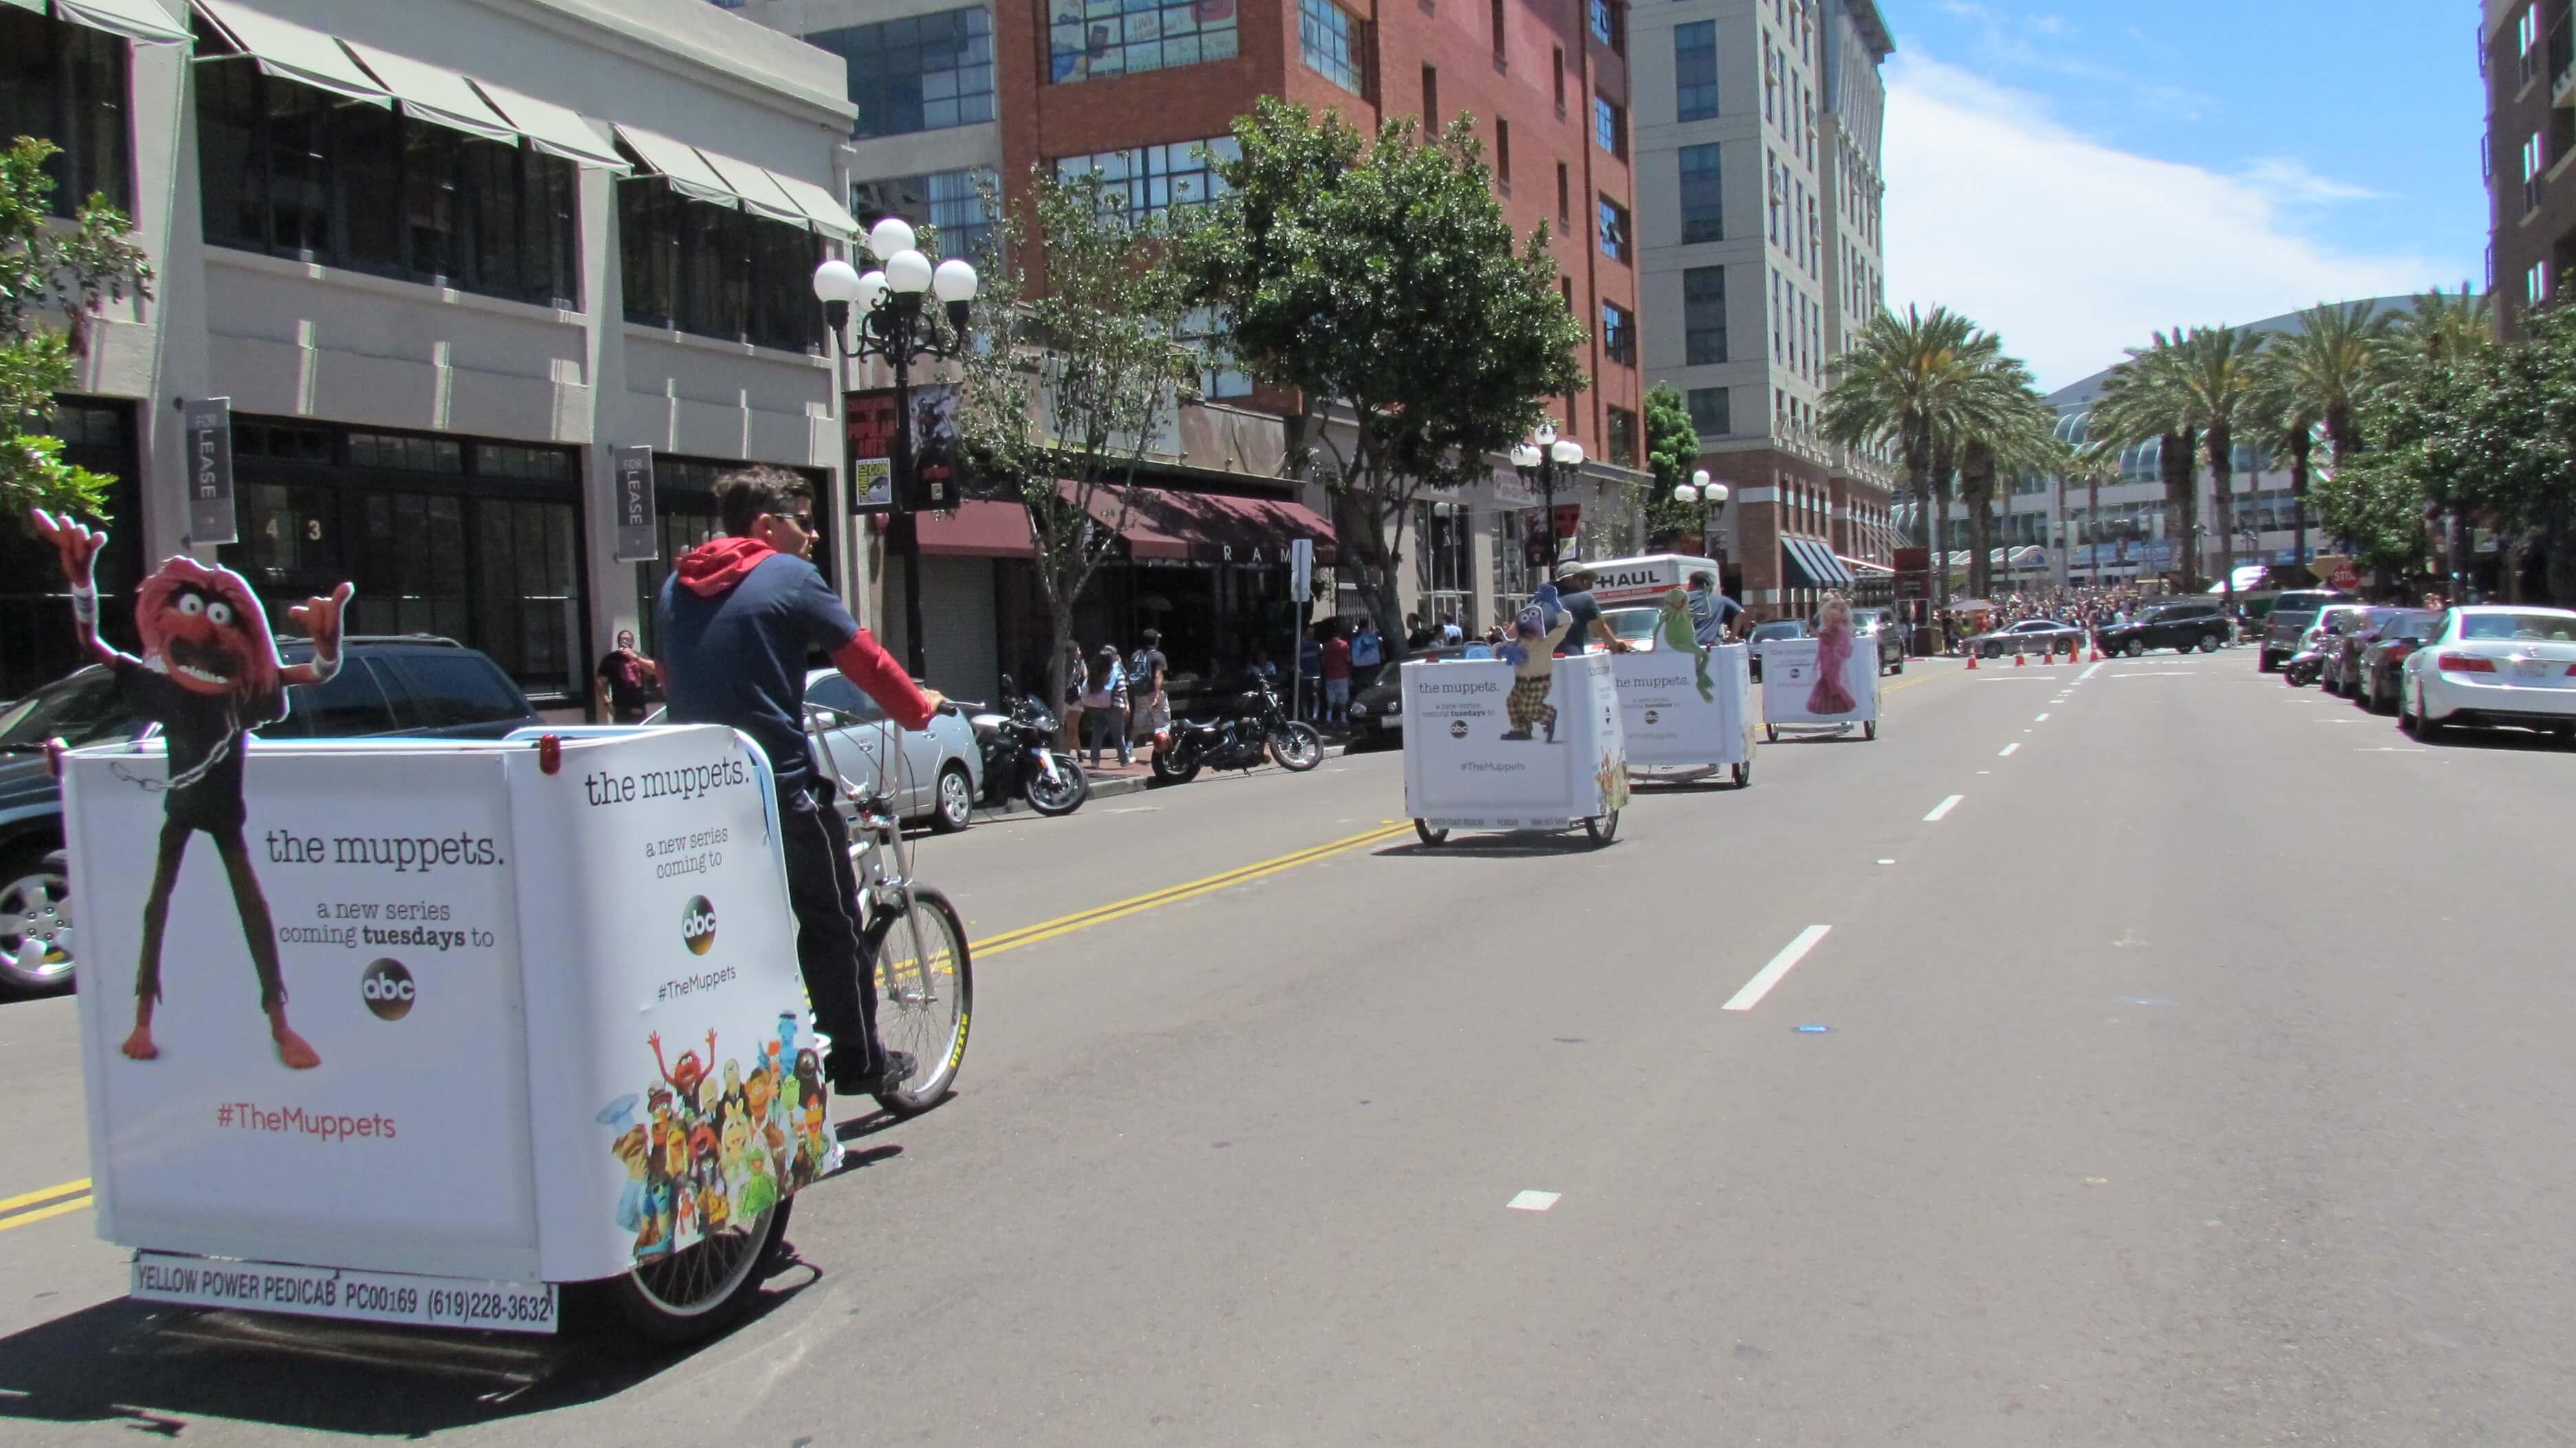 Branded Pedicabs allow tired pedestrians to come along for the advertised ride